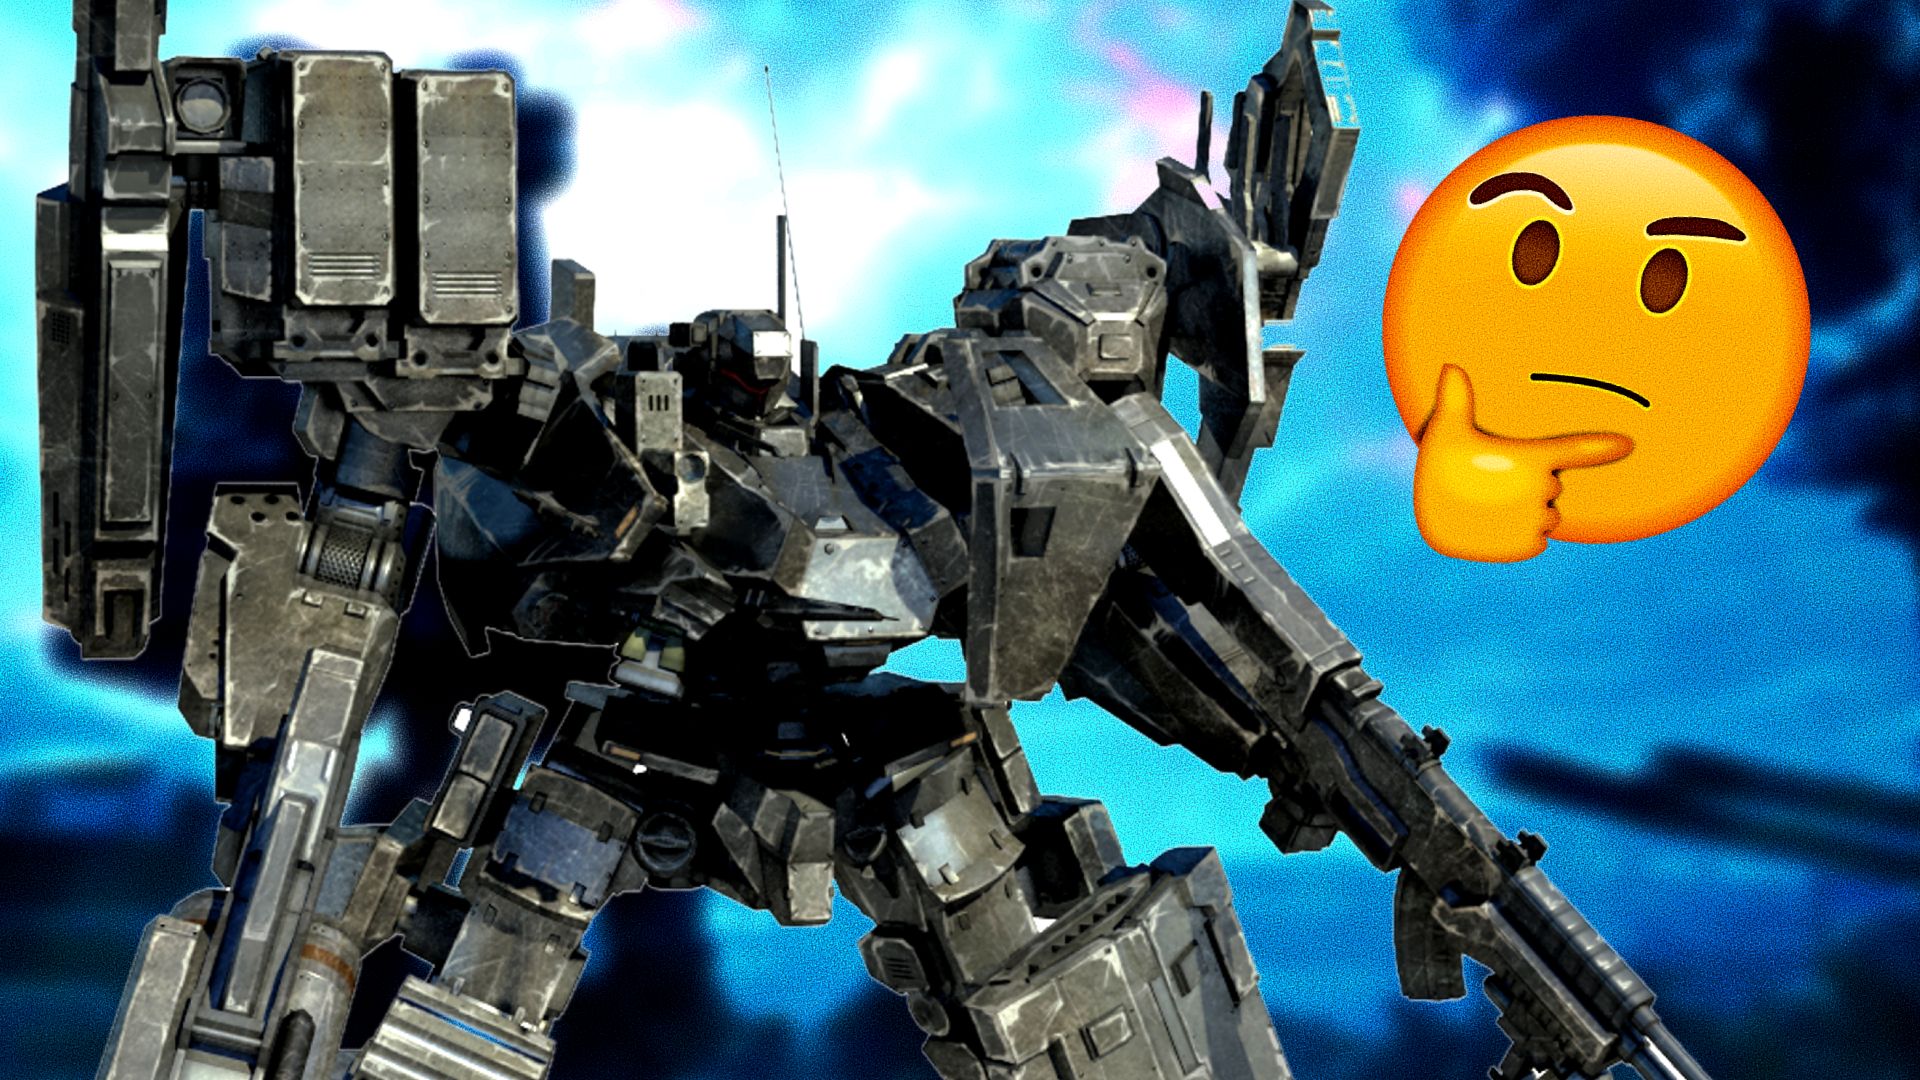 Where to Find and Play Every Armored Core Game & Expansion